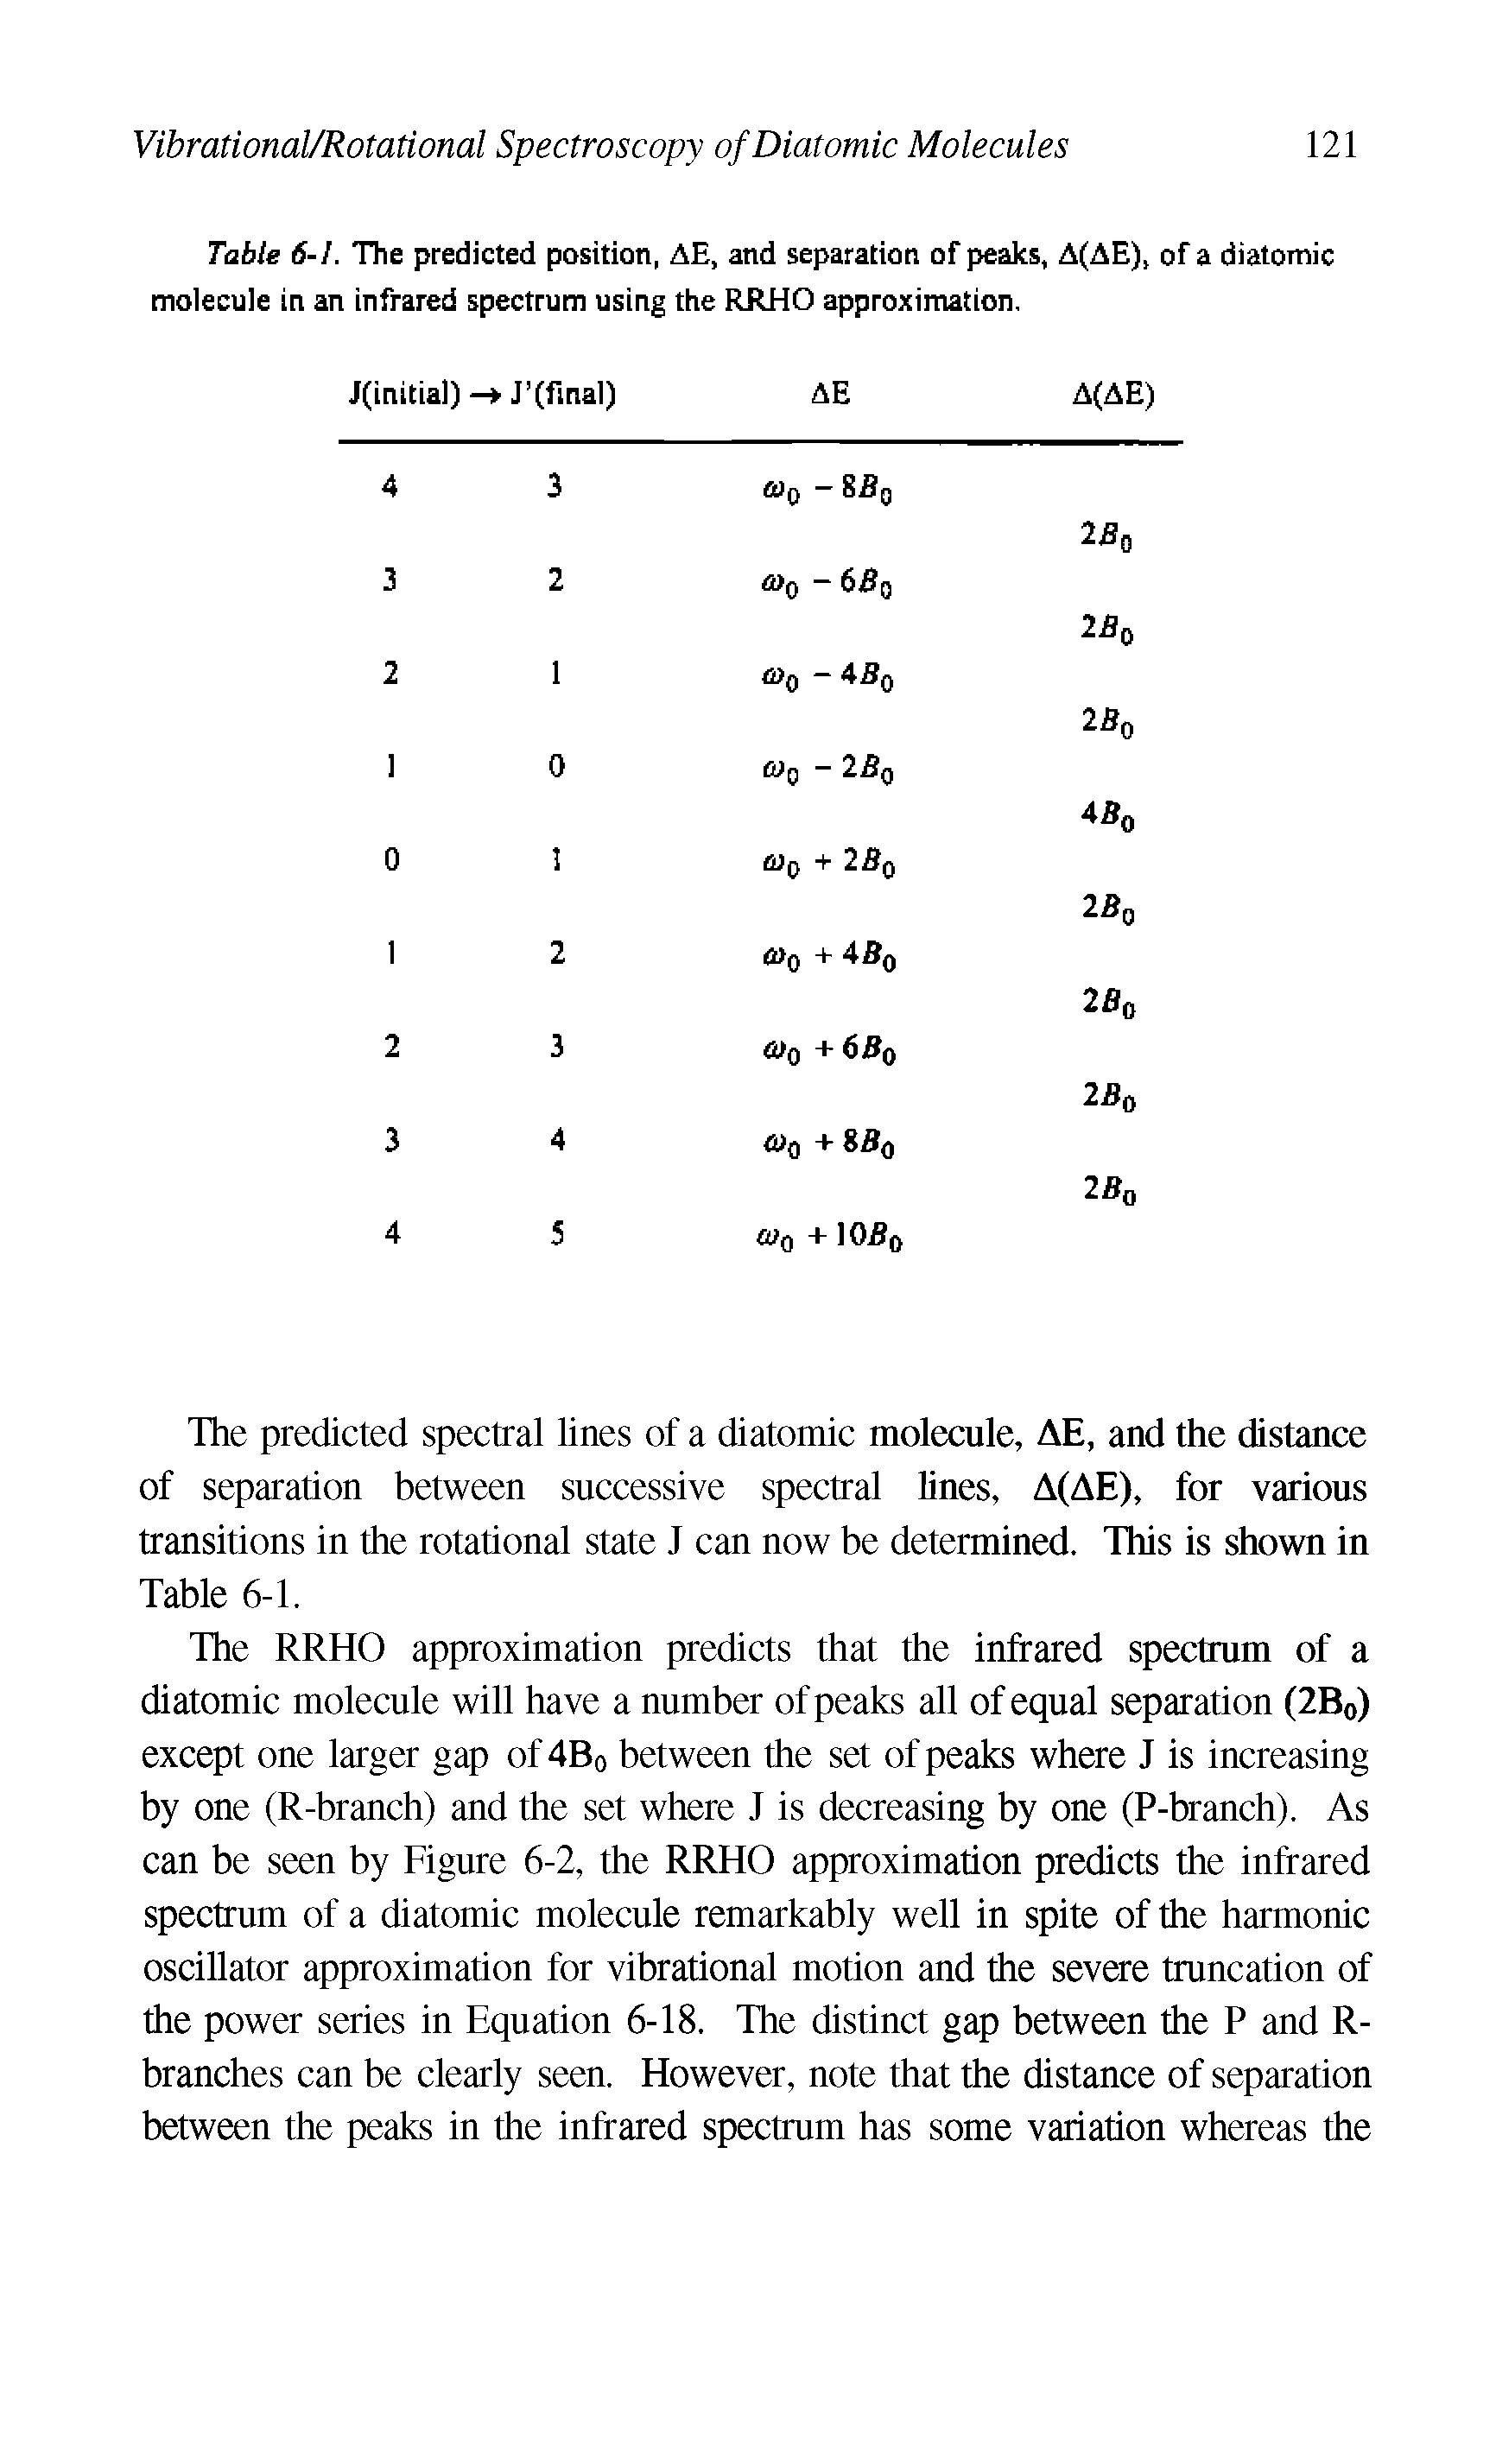 Table 6-1. The predicted position, AE, and separation of peaks, A(AE), of a diatomic molecule in an infrared spectrum using the RRHO approximation.